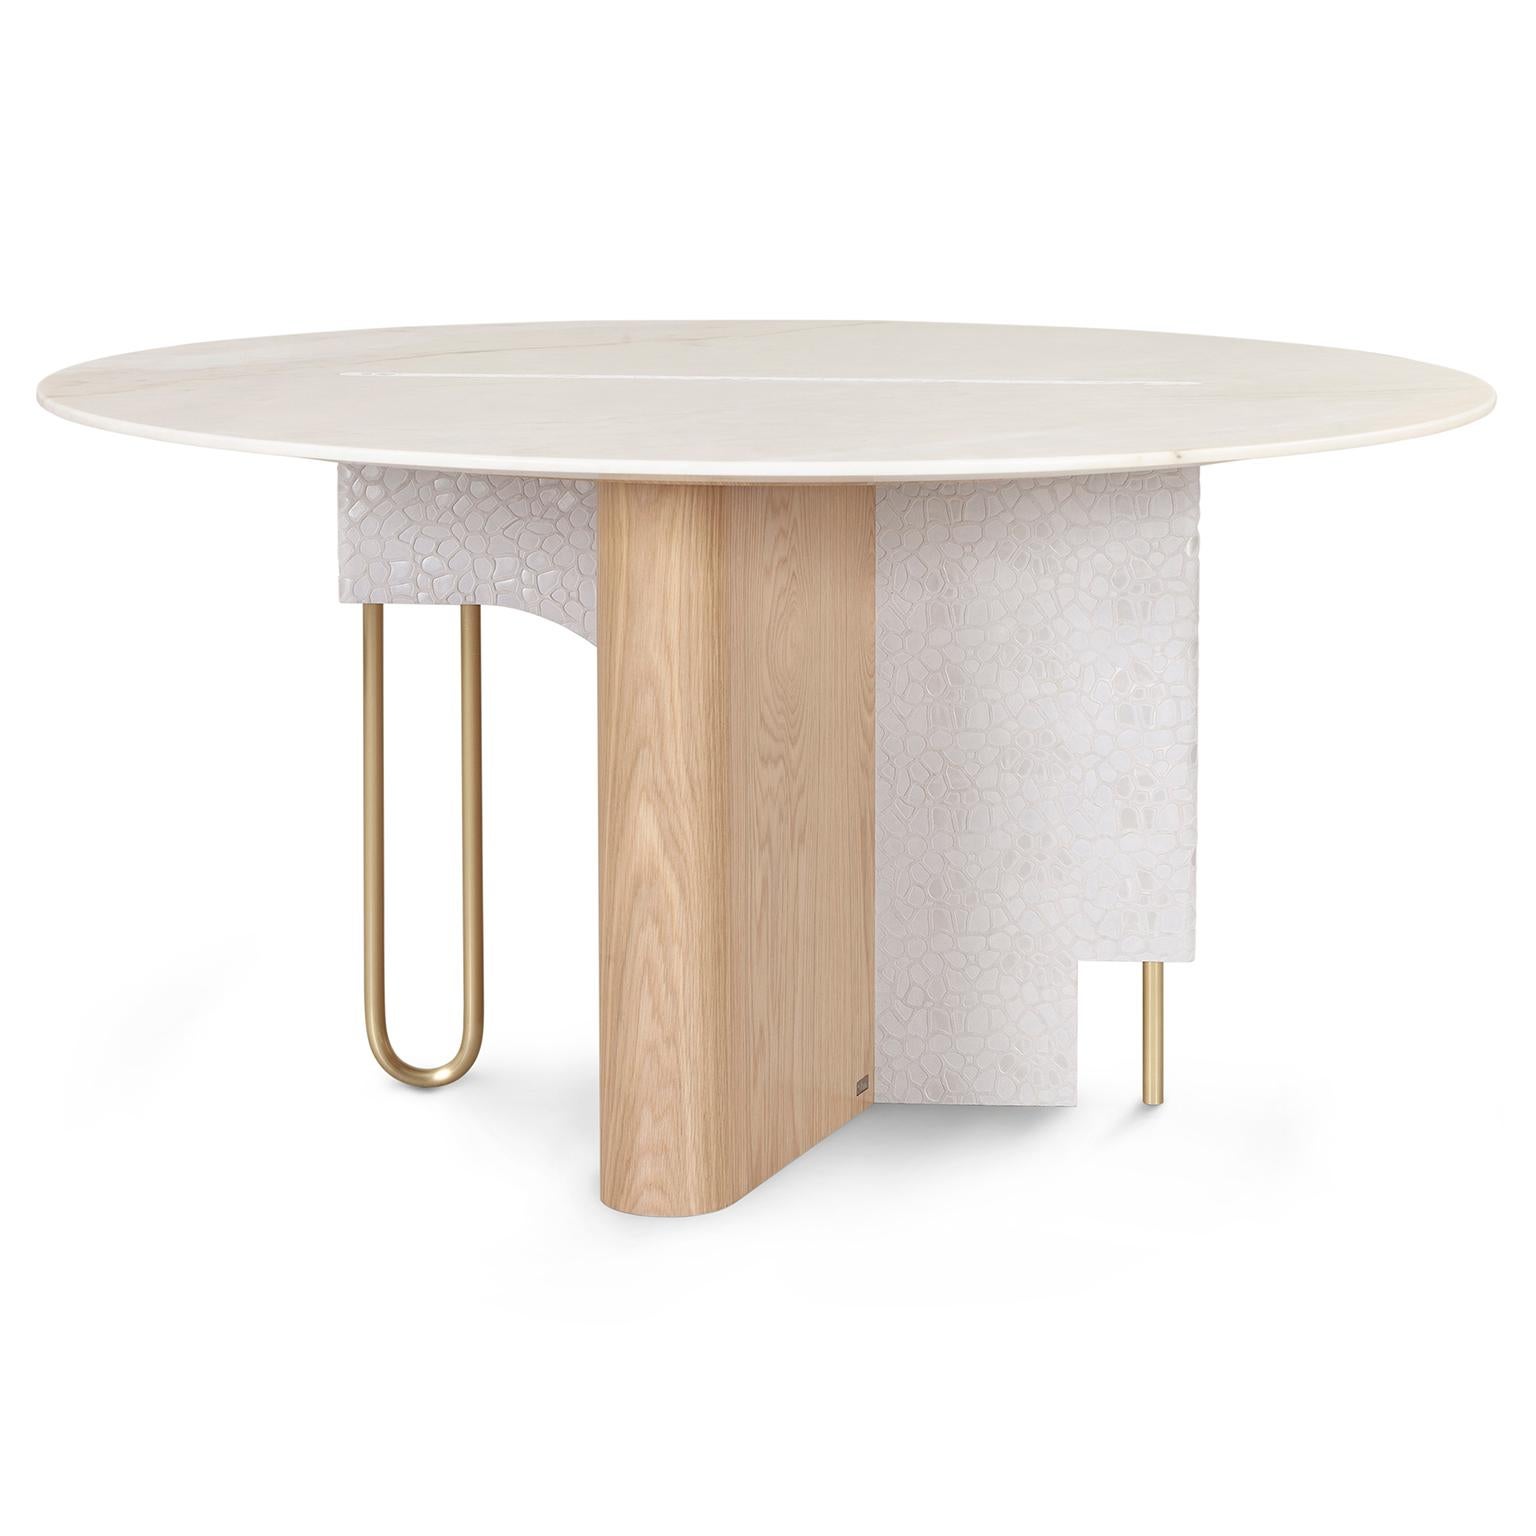 6 person round dining table